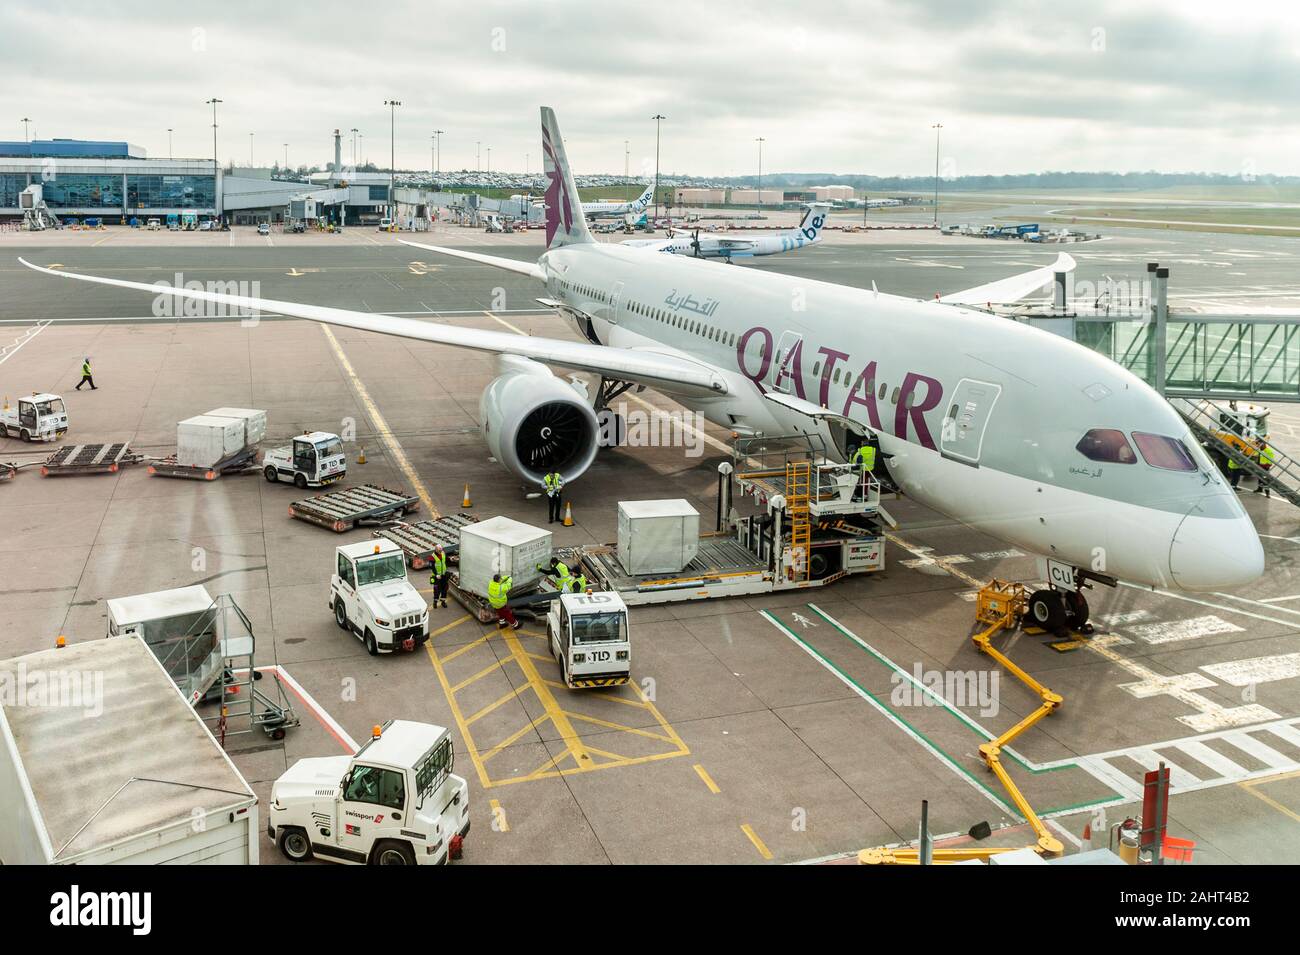 Qatar Airways Boeing 787-8 Dreamliner has passenger's luggage unloaded at Birmingham Airport, West Midlands, UK, after a flight from the Middle East. Stock Photo